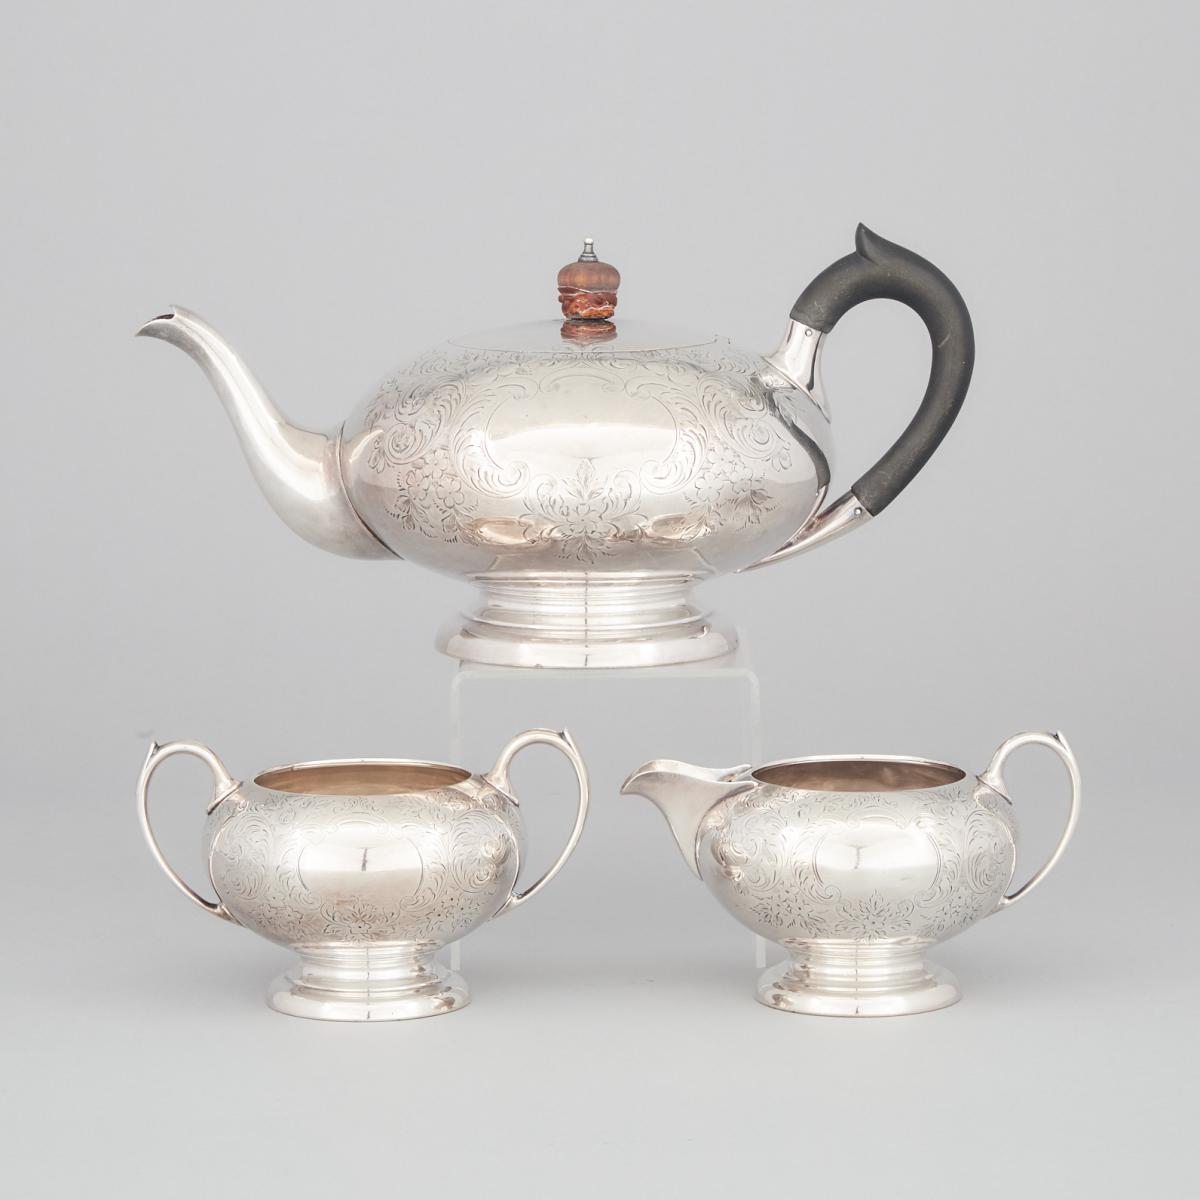 Canadian Silver Tea Service, Henry Birks & Sons, Montreal, Que., 1904-24, teapot length 11.2 in — 28